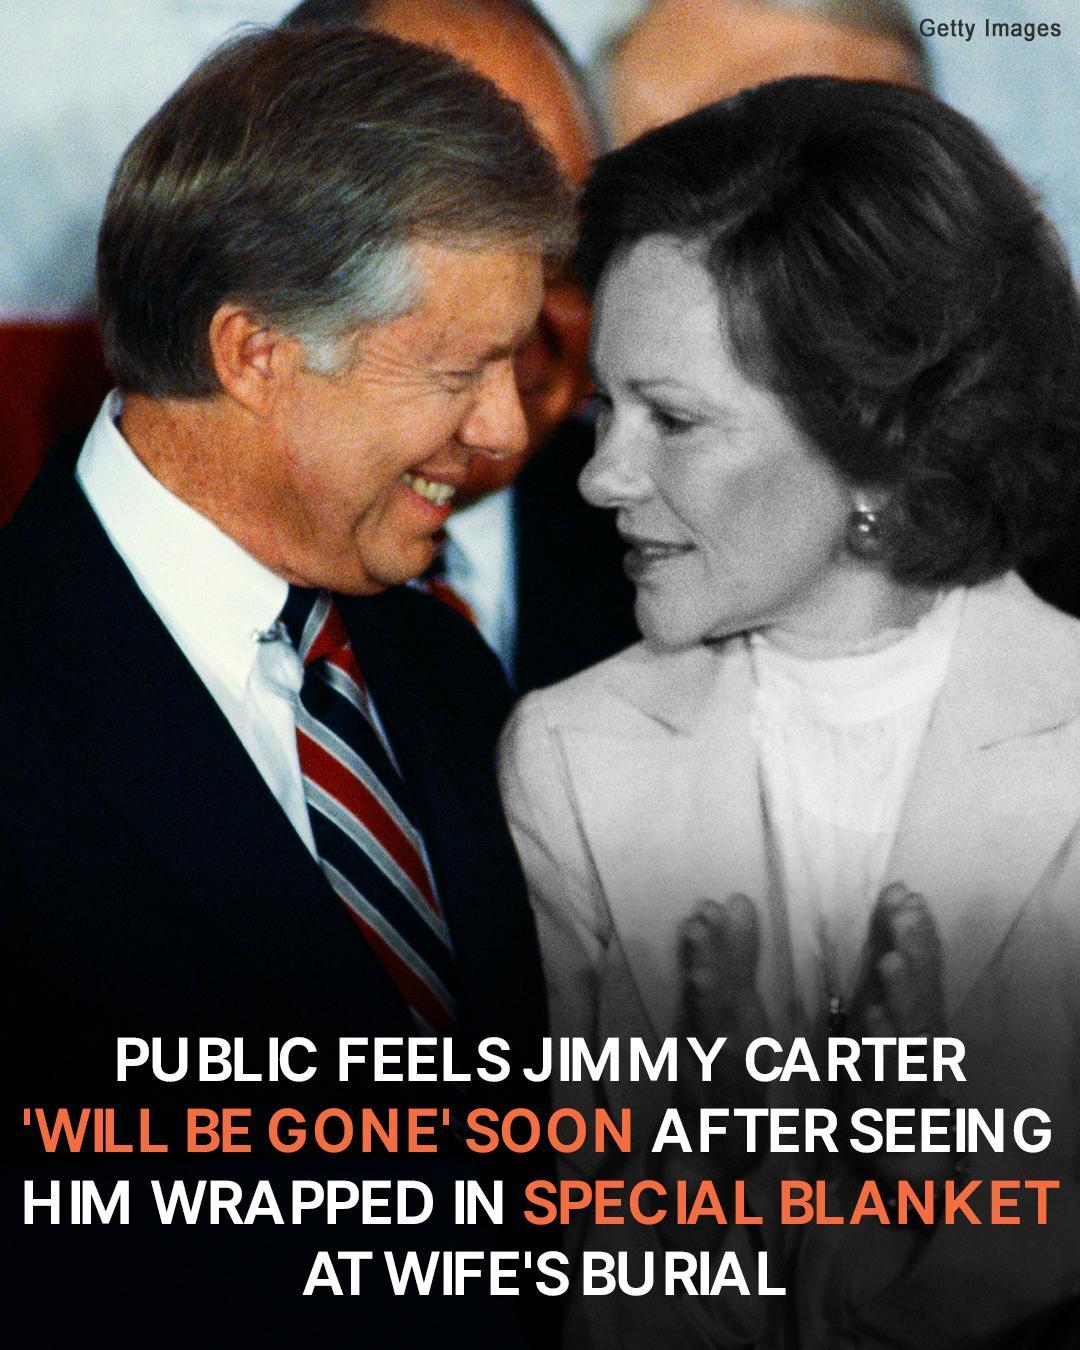 Public Predicts Jimmy Carter ‘Will Be Gone’ Soon after Attending Wife’s Burial Wrapped in Special Blanket